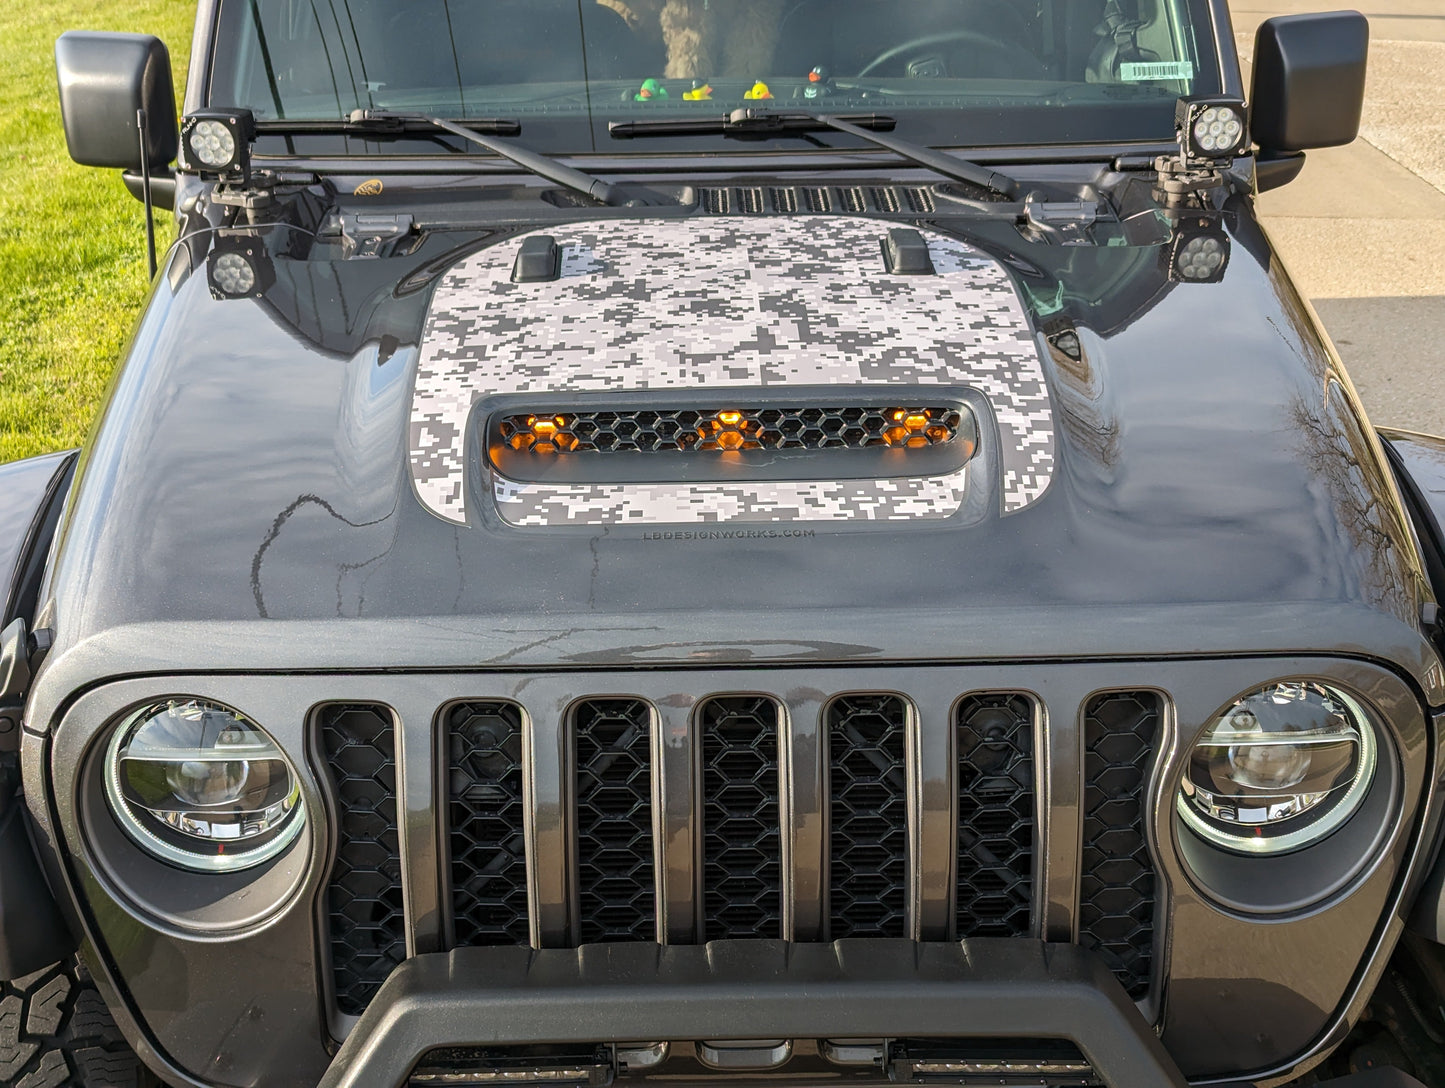 Digital Camouflage Printed Blackout Vent Rubicon Mojave decal set- fits 2020 and newer Jeep Gladiator